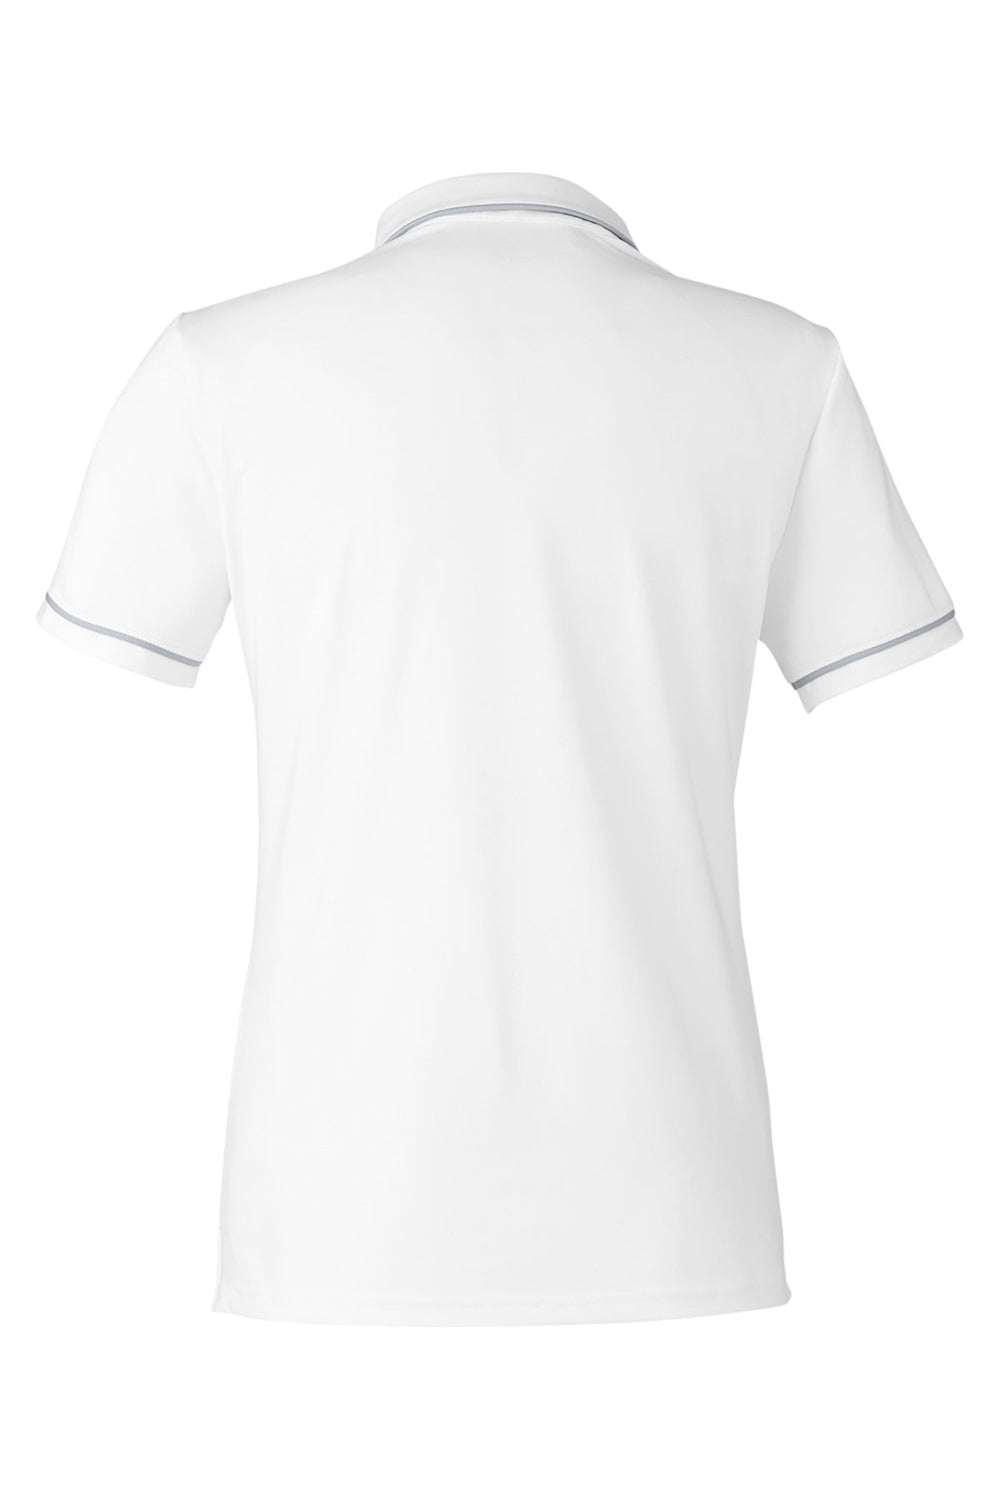 Under Armour 1376905 Womens Teams Performance Moisture Wicking Short Sleeve Polo Shirt White Flat Back